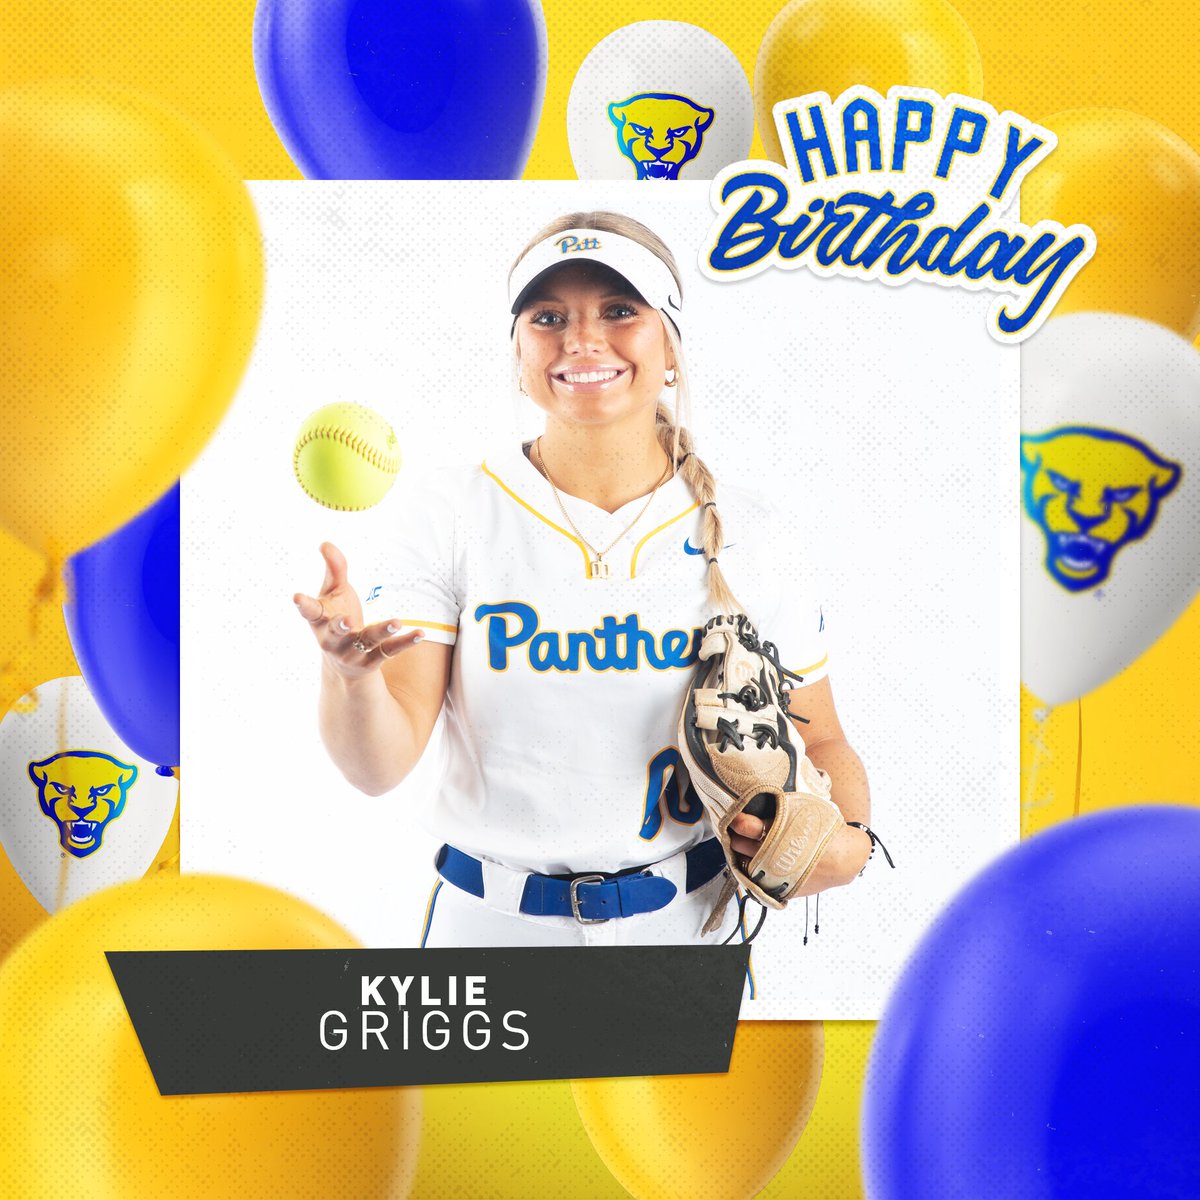 Wishing @kyliegriggss a very Happy Birthday! 🥳 Enjoy your day to the fullest!